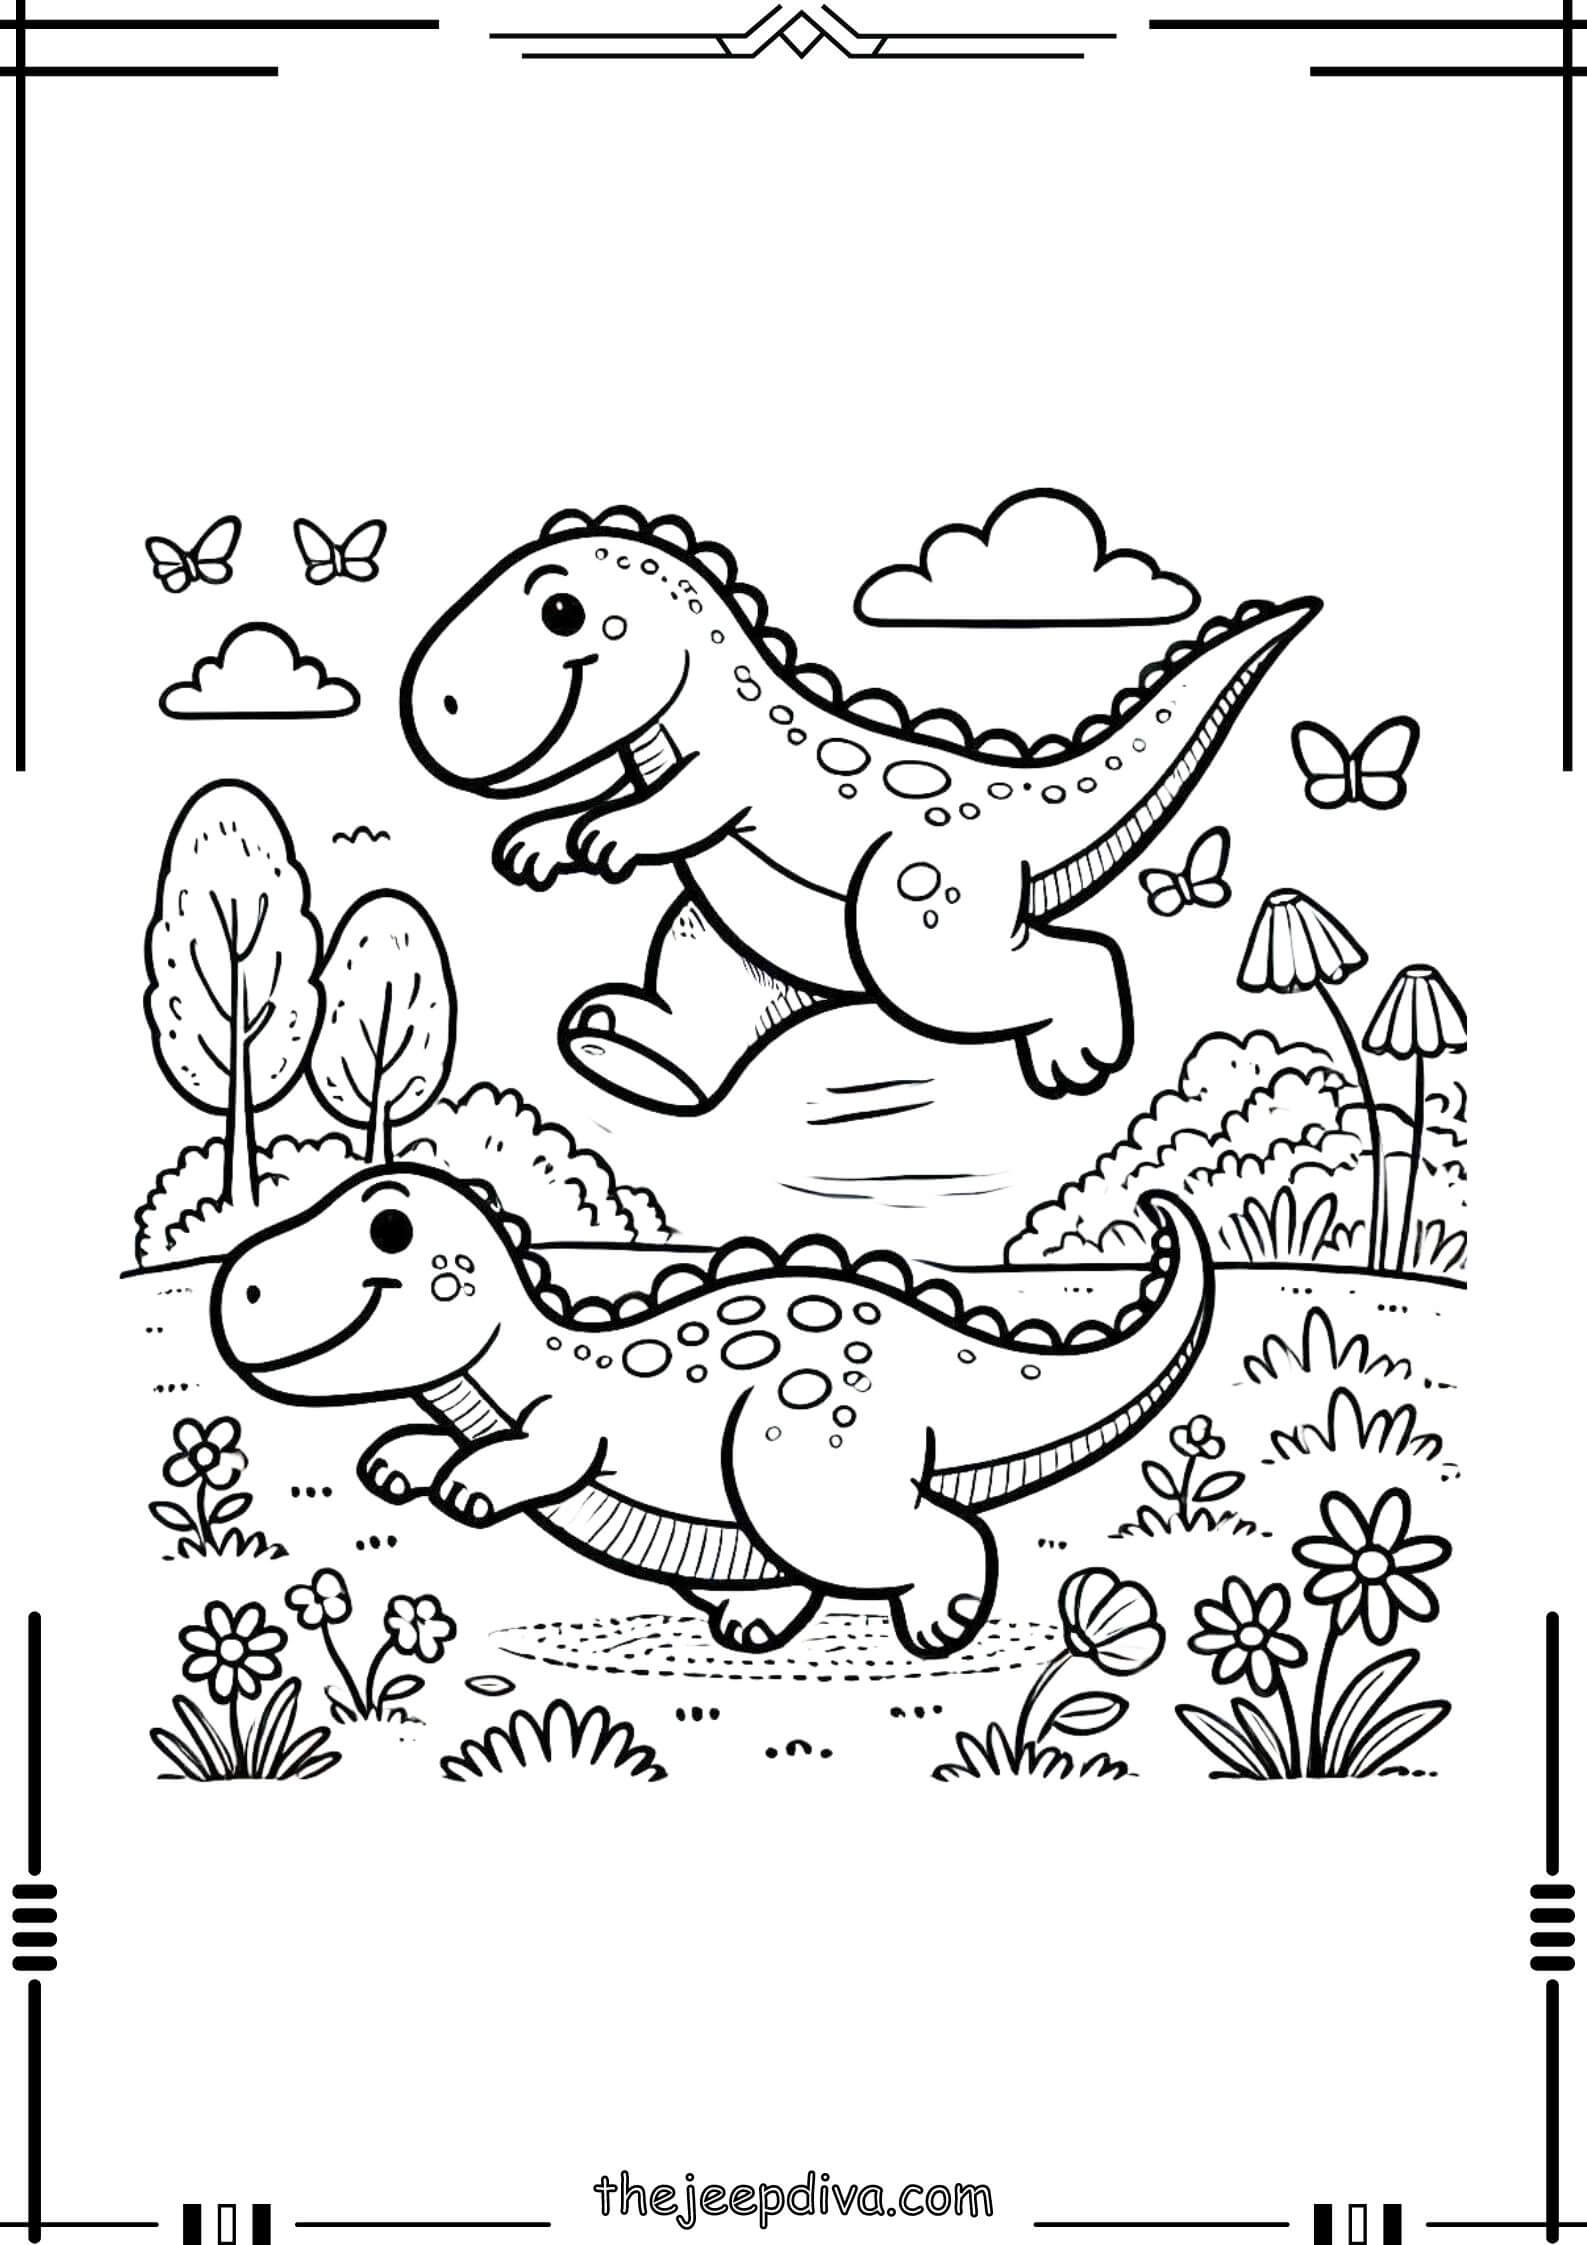 Dinosaur-Colouring-Pages-Hard-11